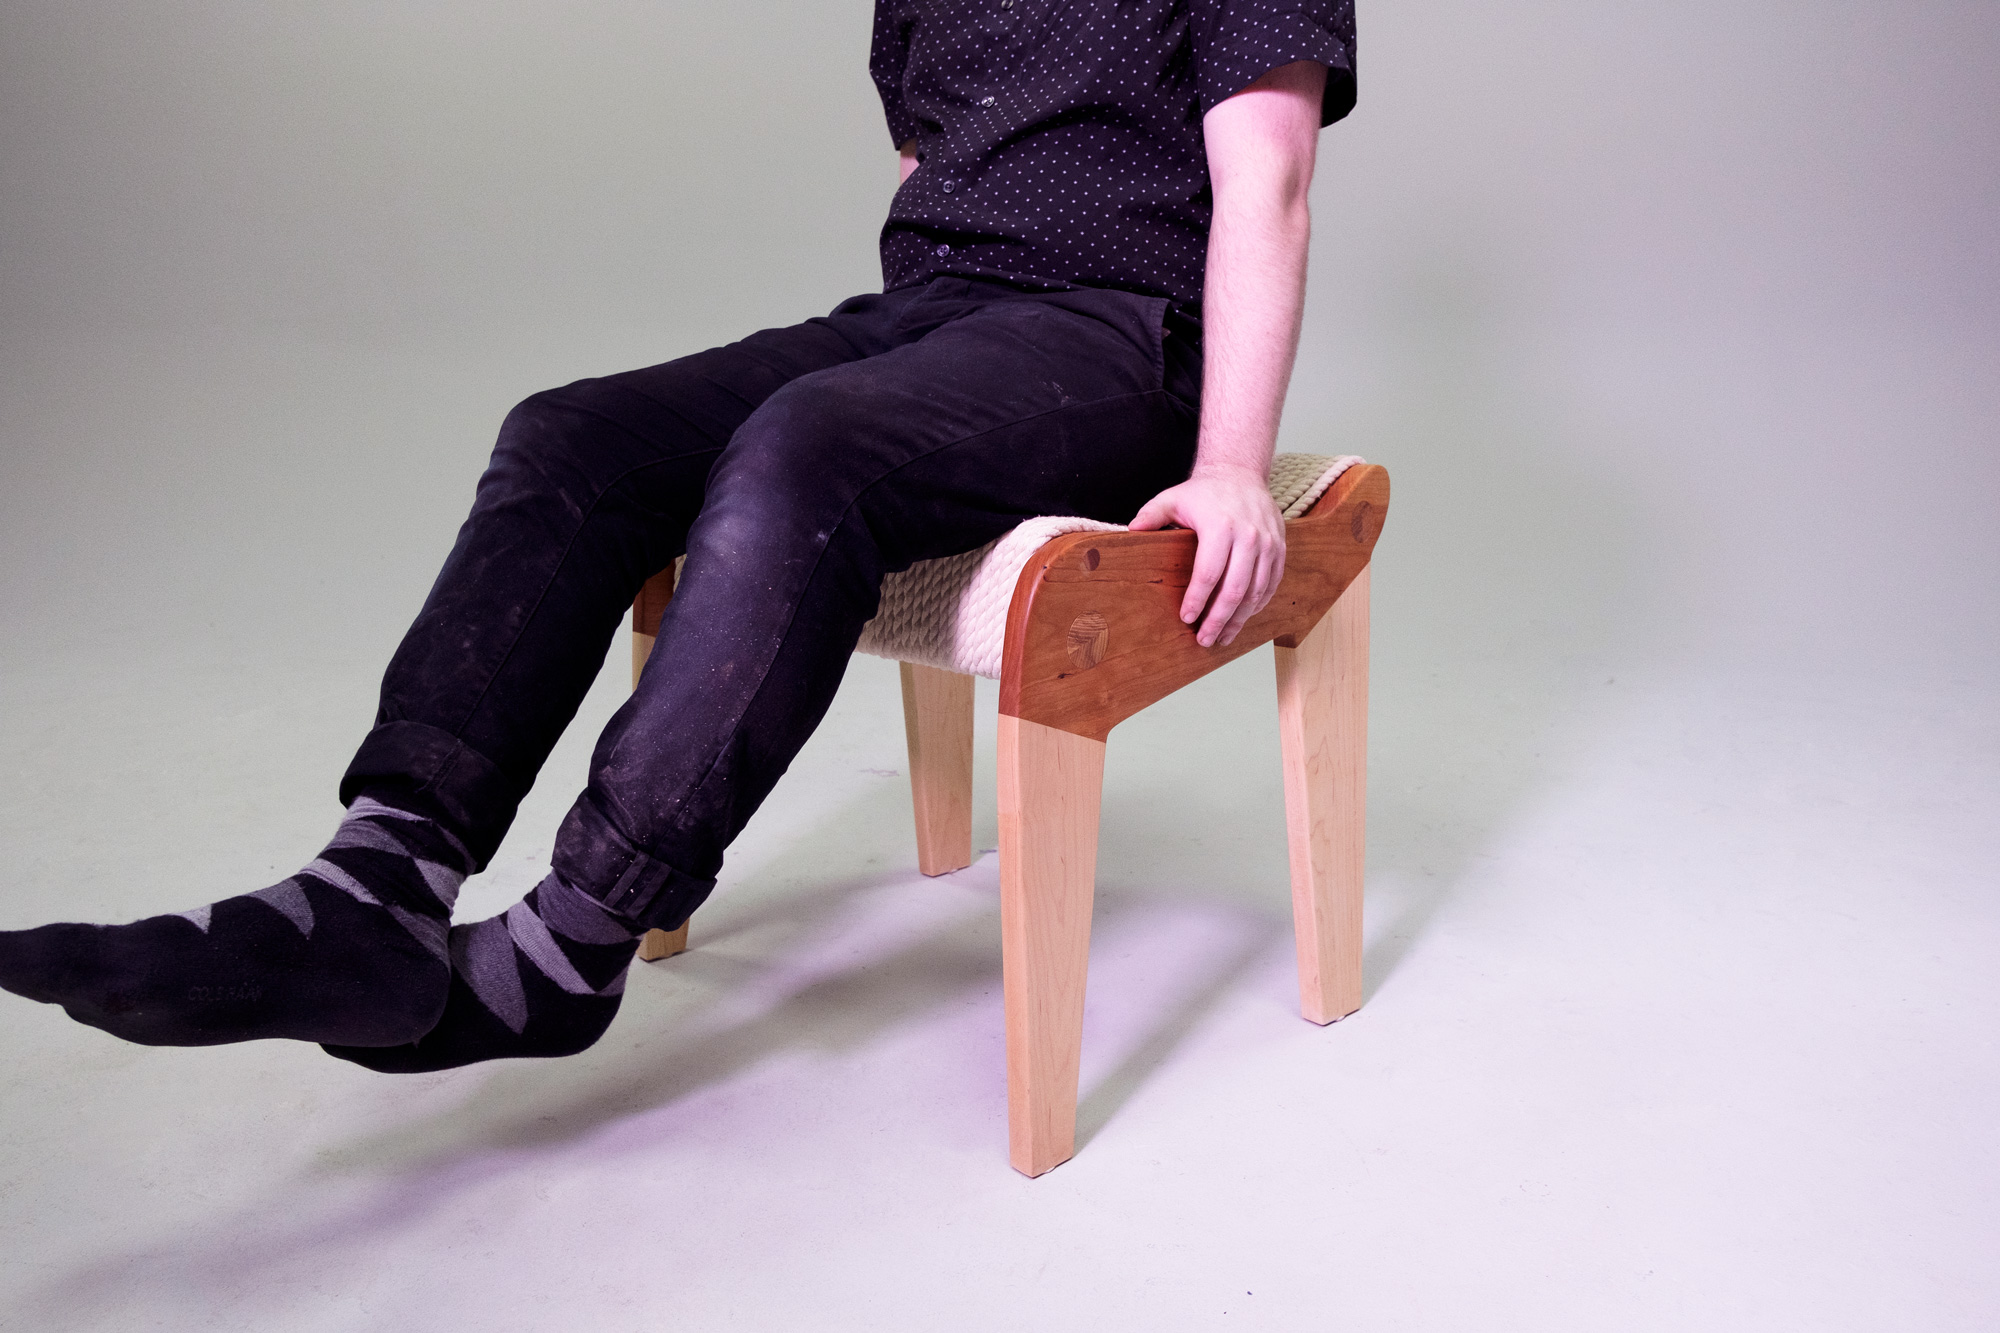 Person sitting on stool made with wood and rope